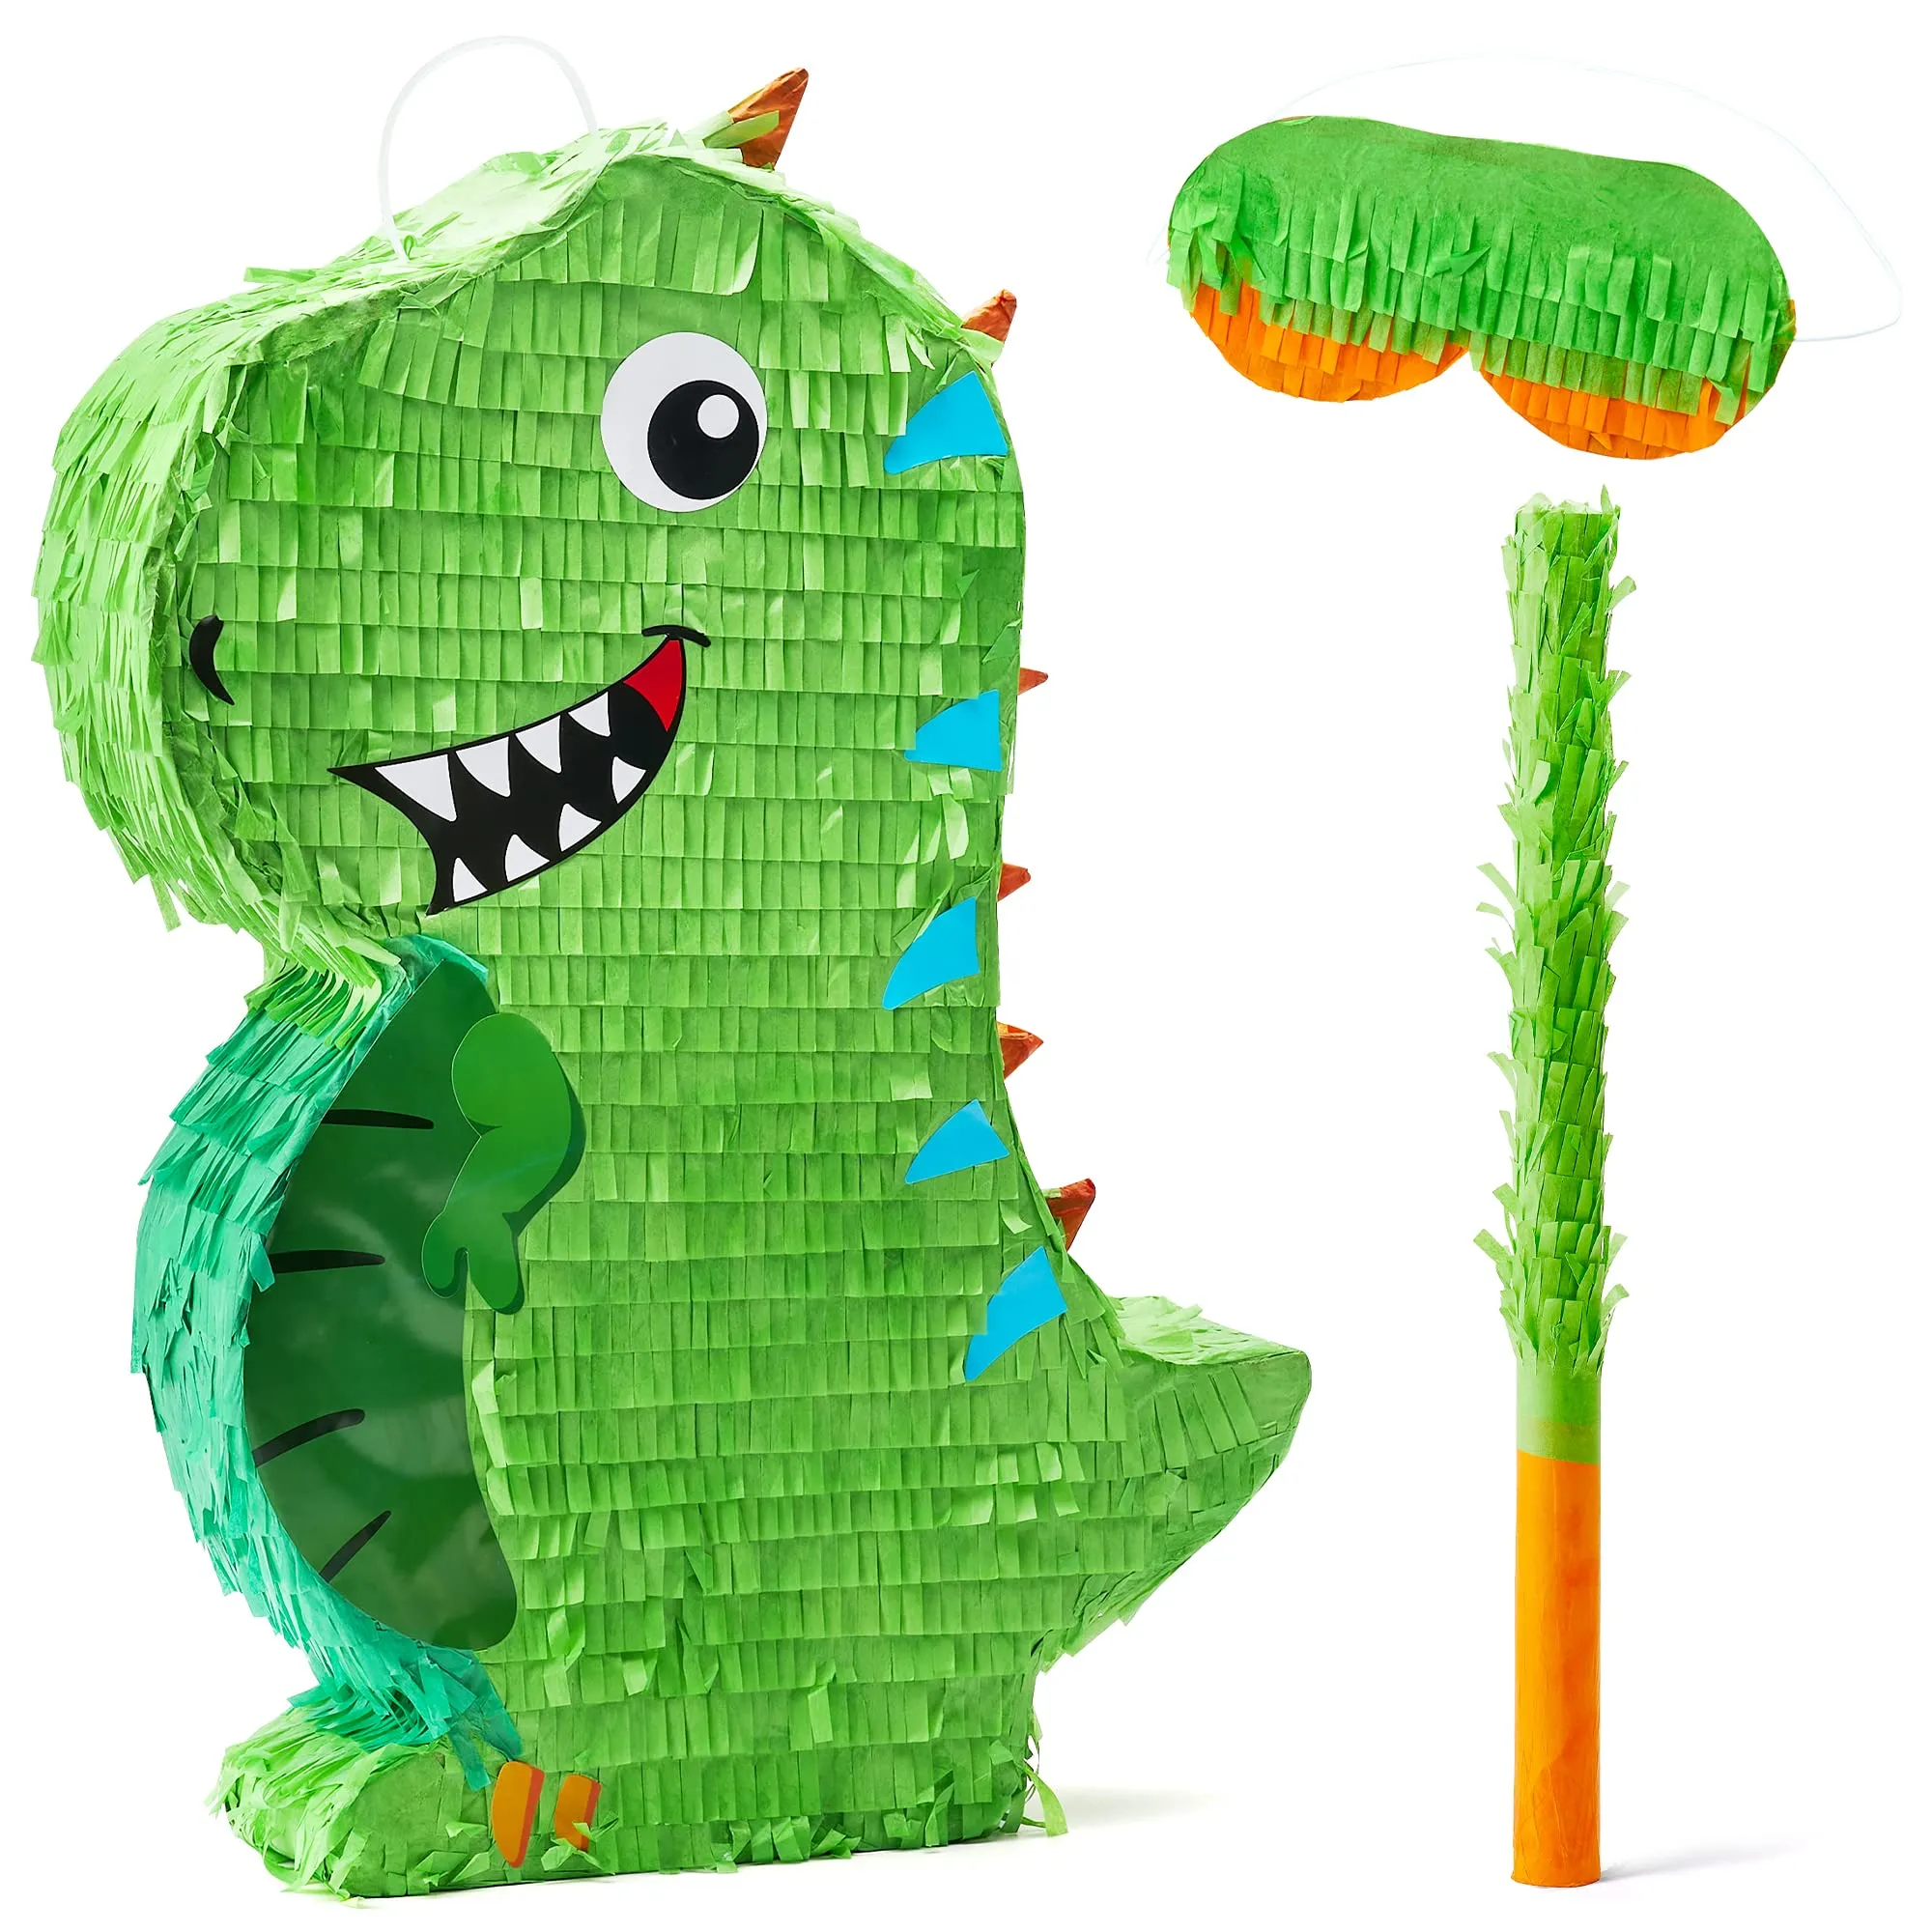 Dinosaur Pinata for Jurassic Size Fun at Parties and Celebrations - T-Rex  Dino Pinata Includes Blind-Fold & Baton - Excellent Addition to a Dinosaur